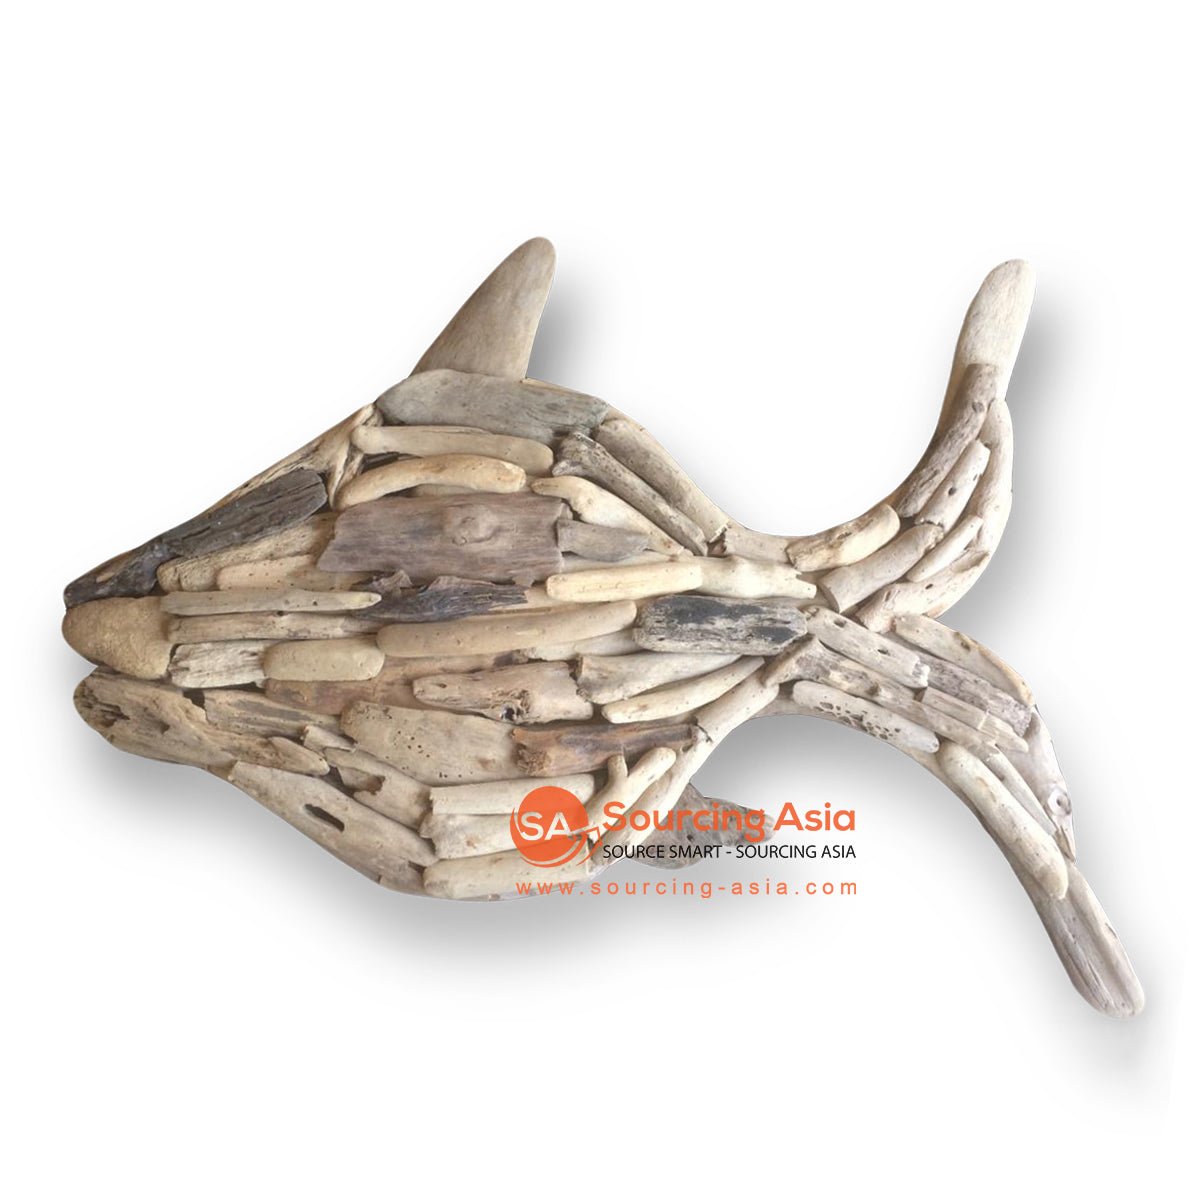 DRIFTWOOD DECORATIONS - Sourcing Asia